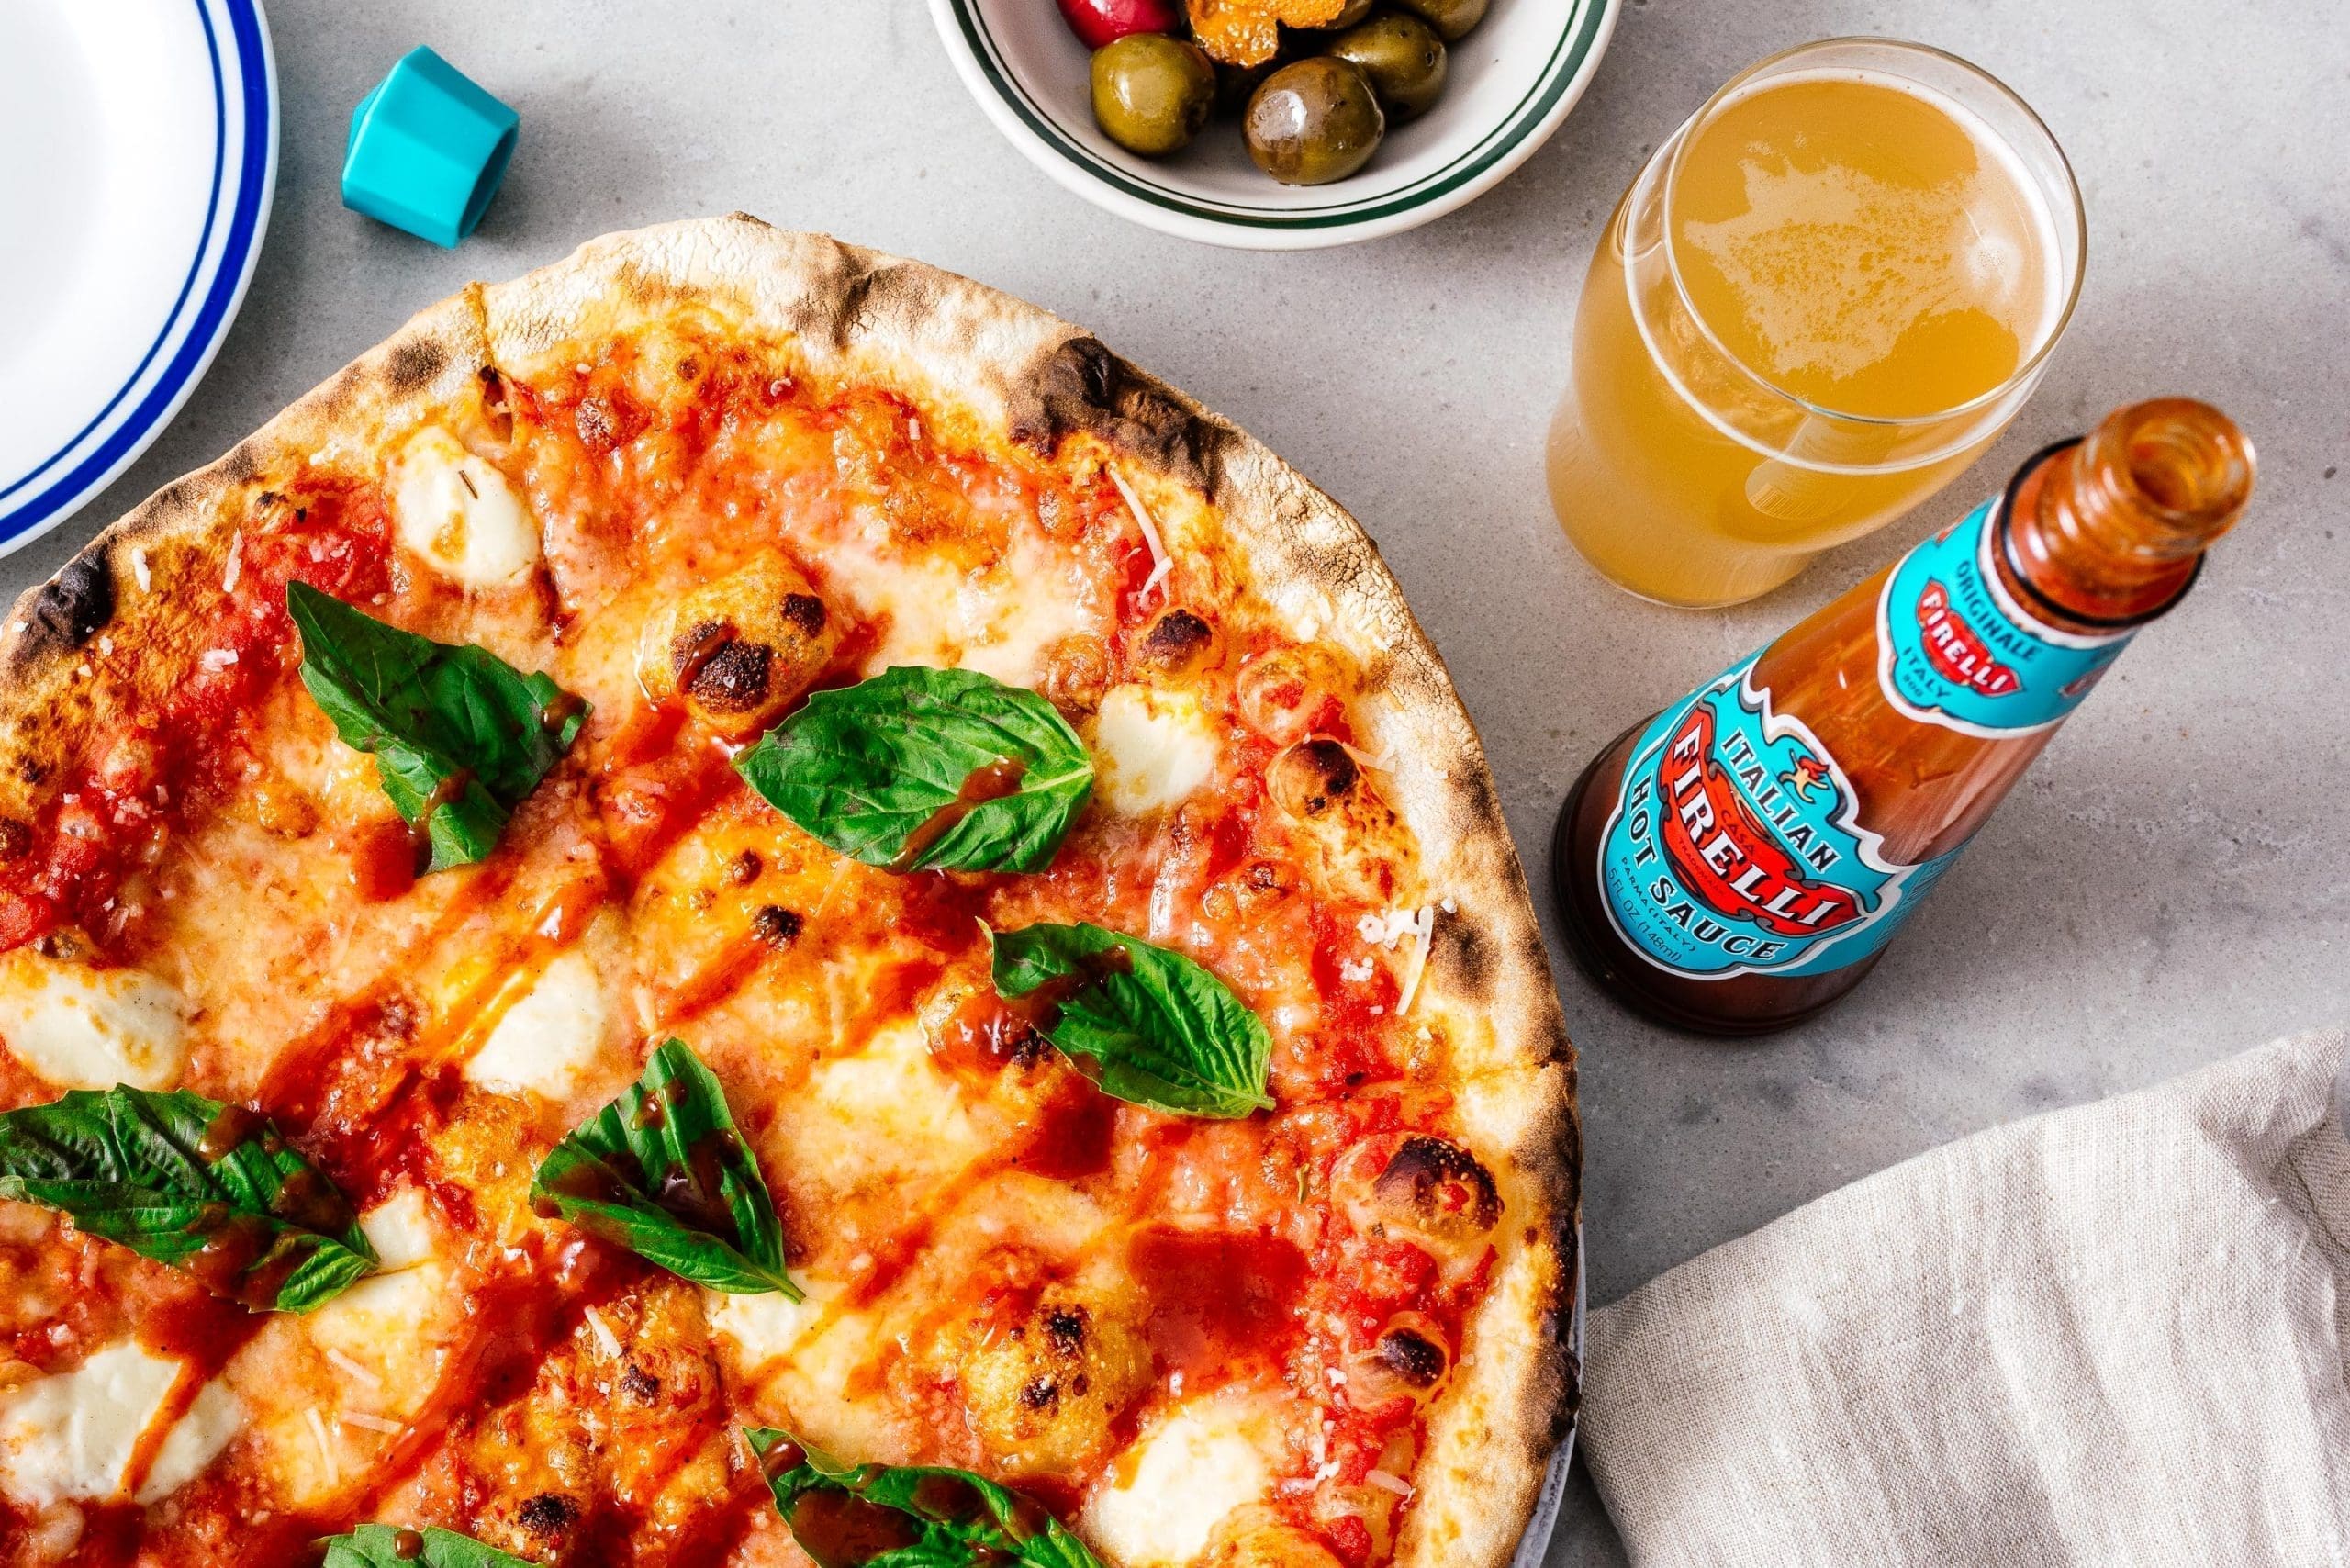 a bottle of firelli hot sauce next to a pizza and a beer